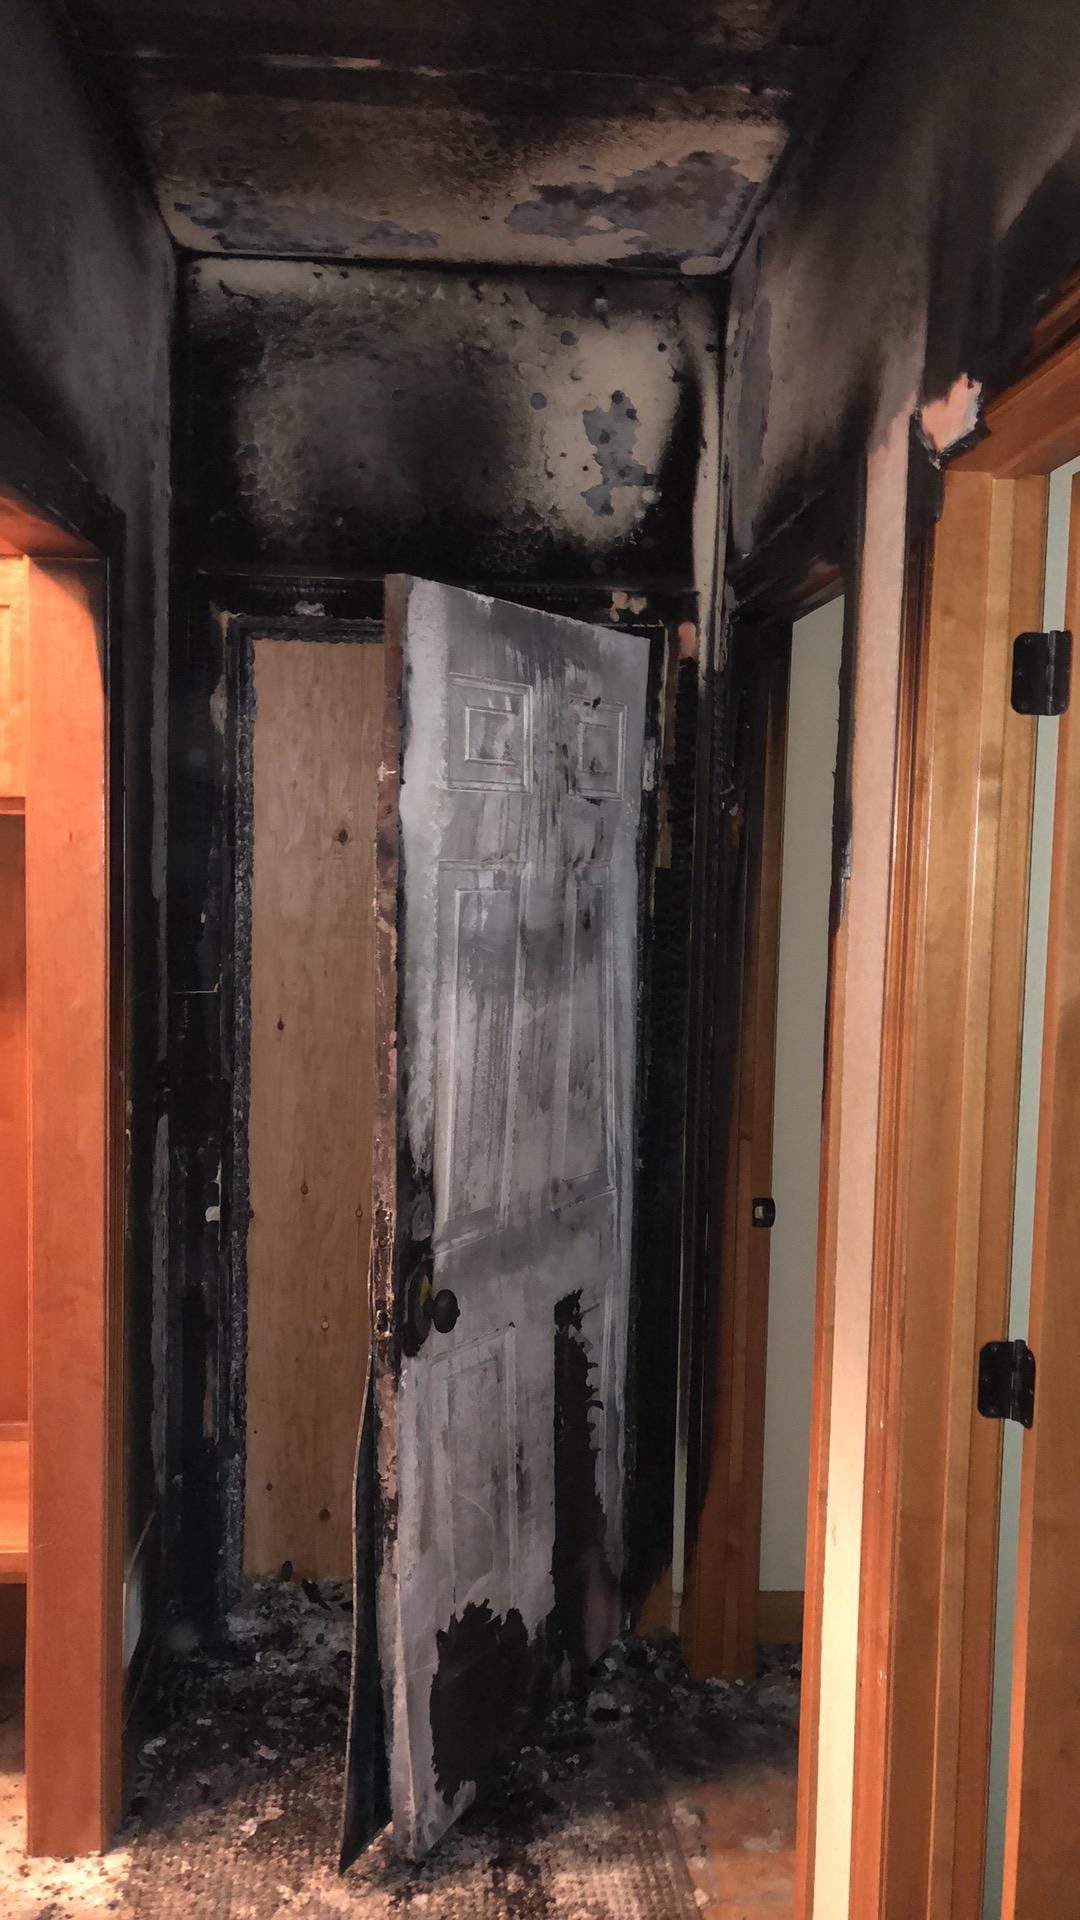 Fire Damage in the Hallway